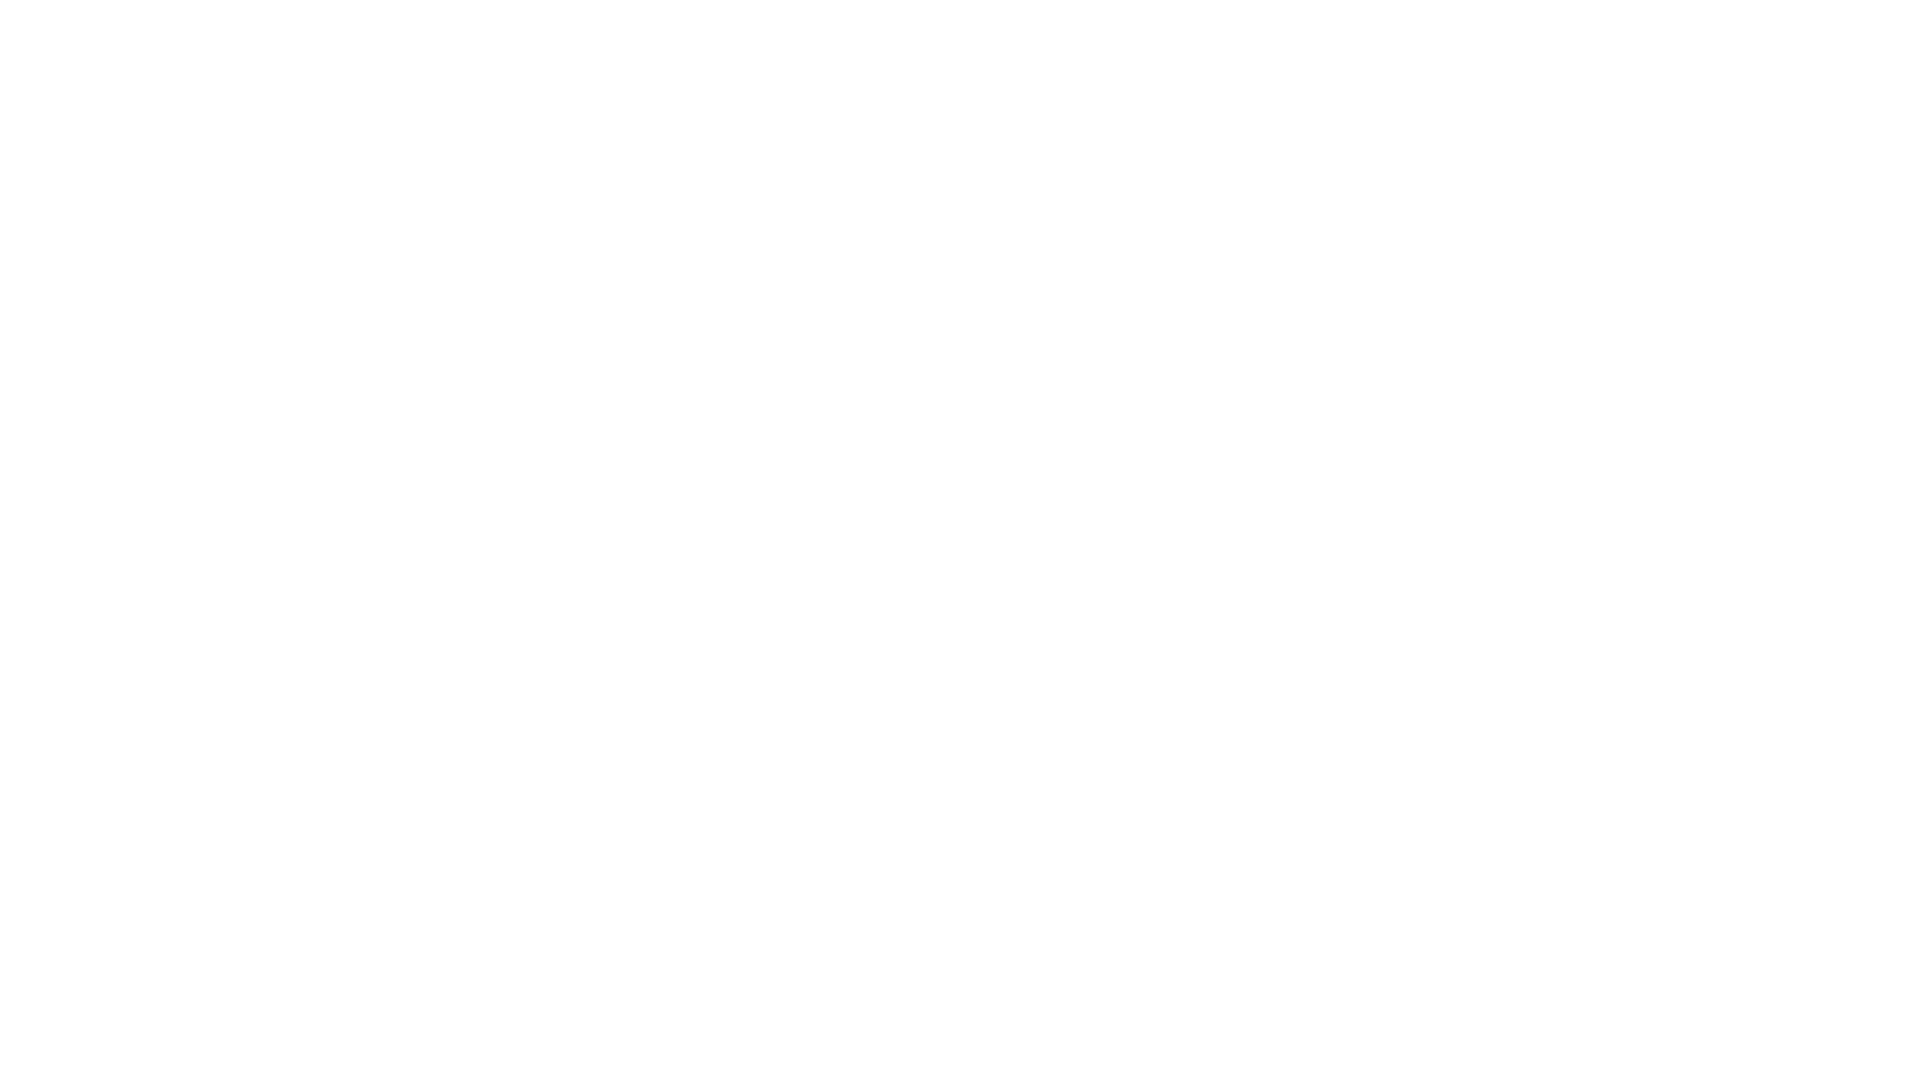 The Chains that Bind Me